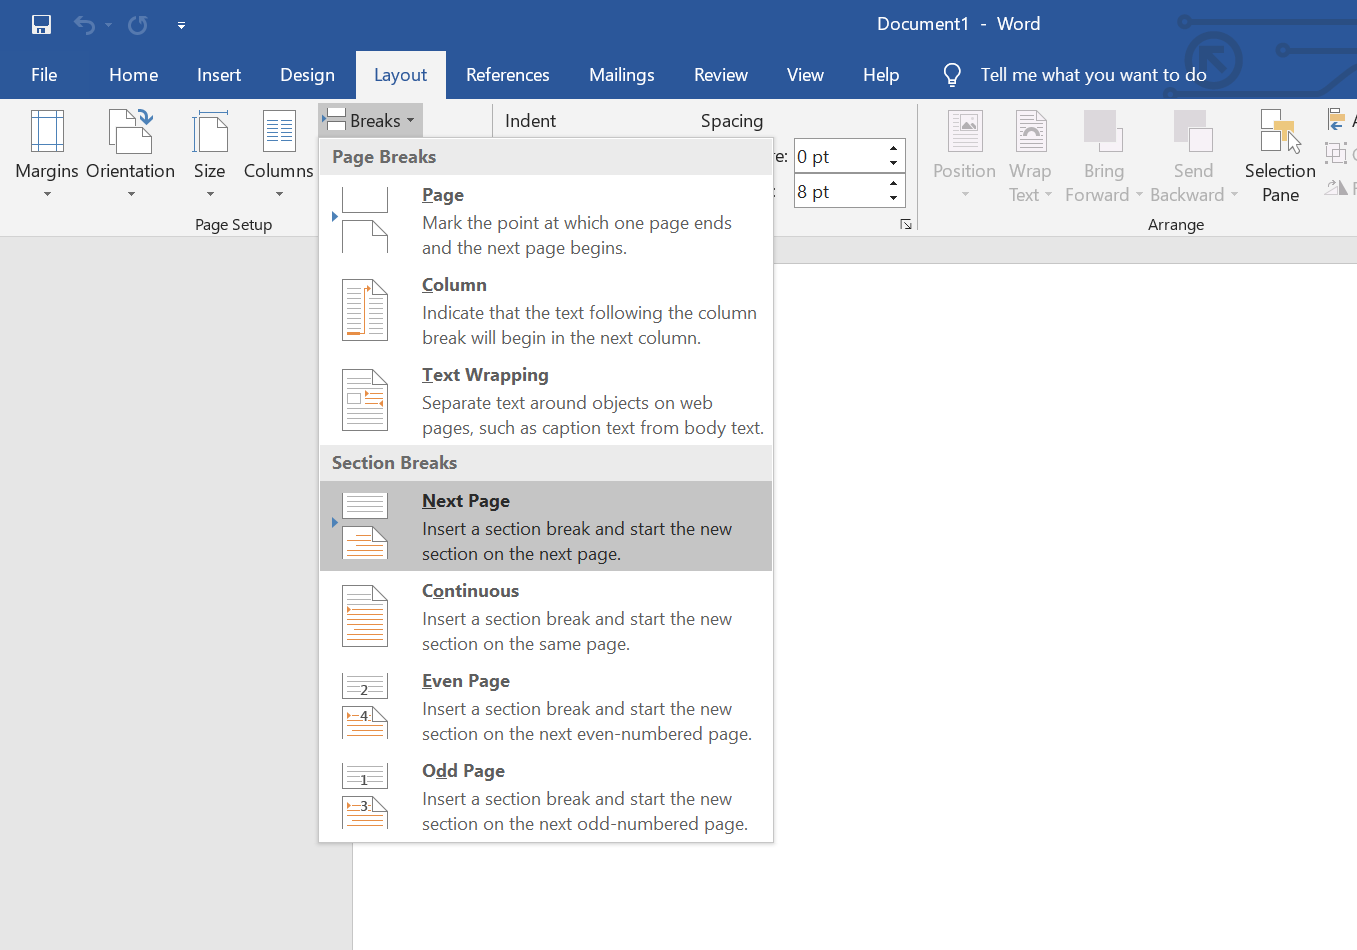 Next page option in Microsoft Word